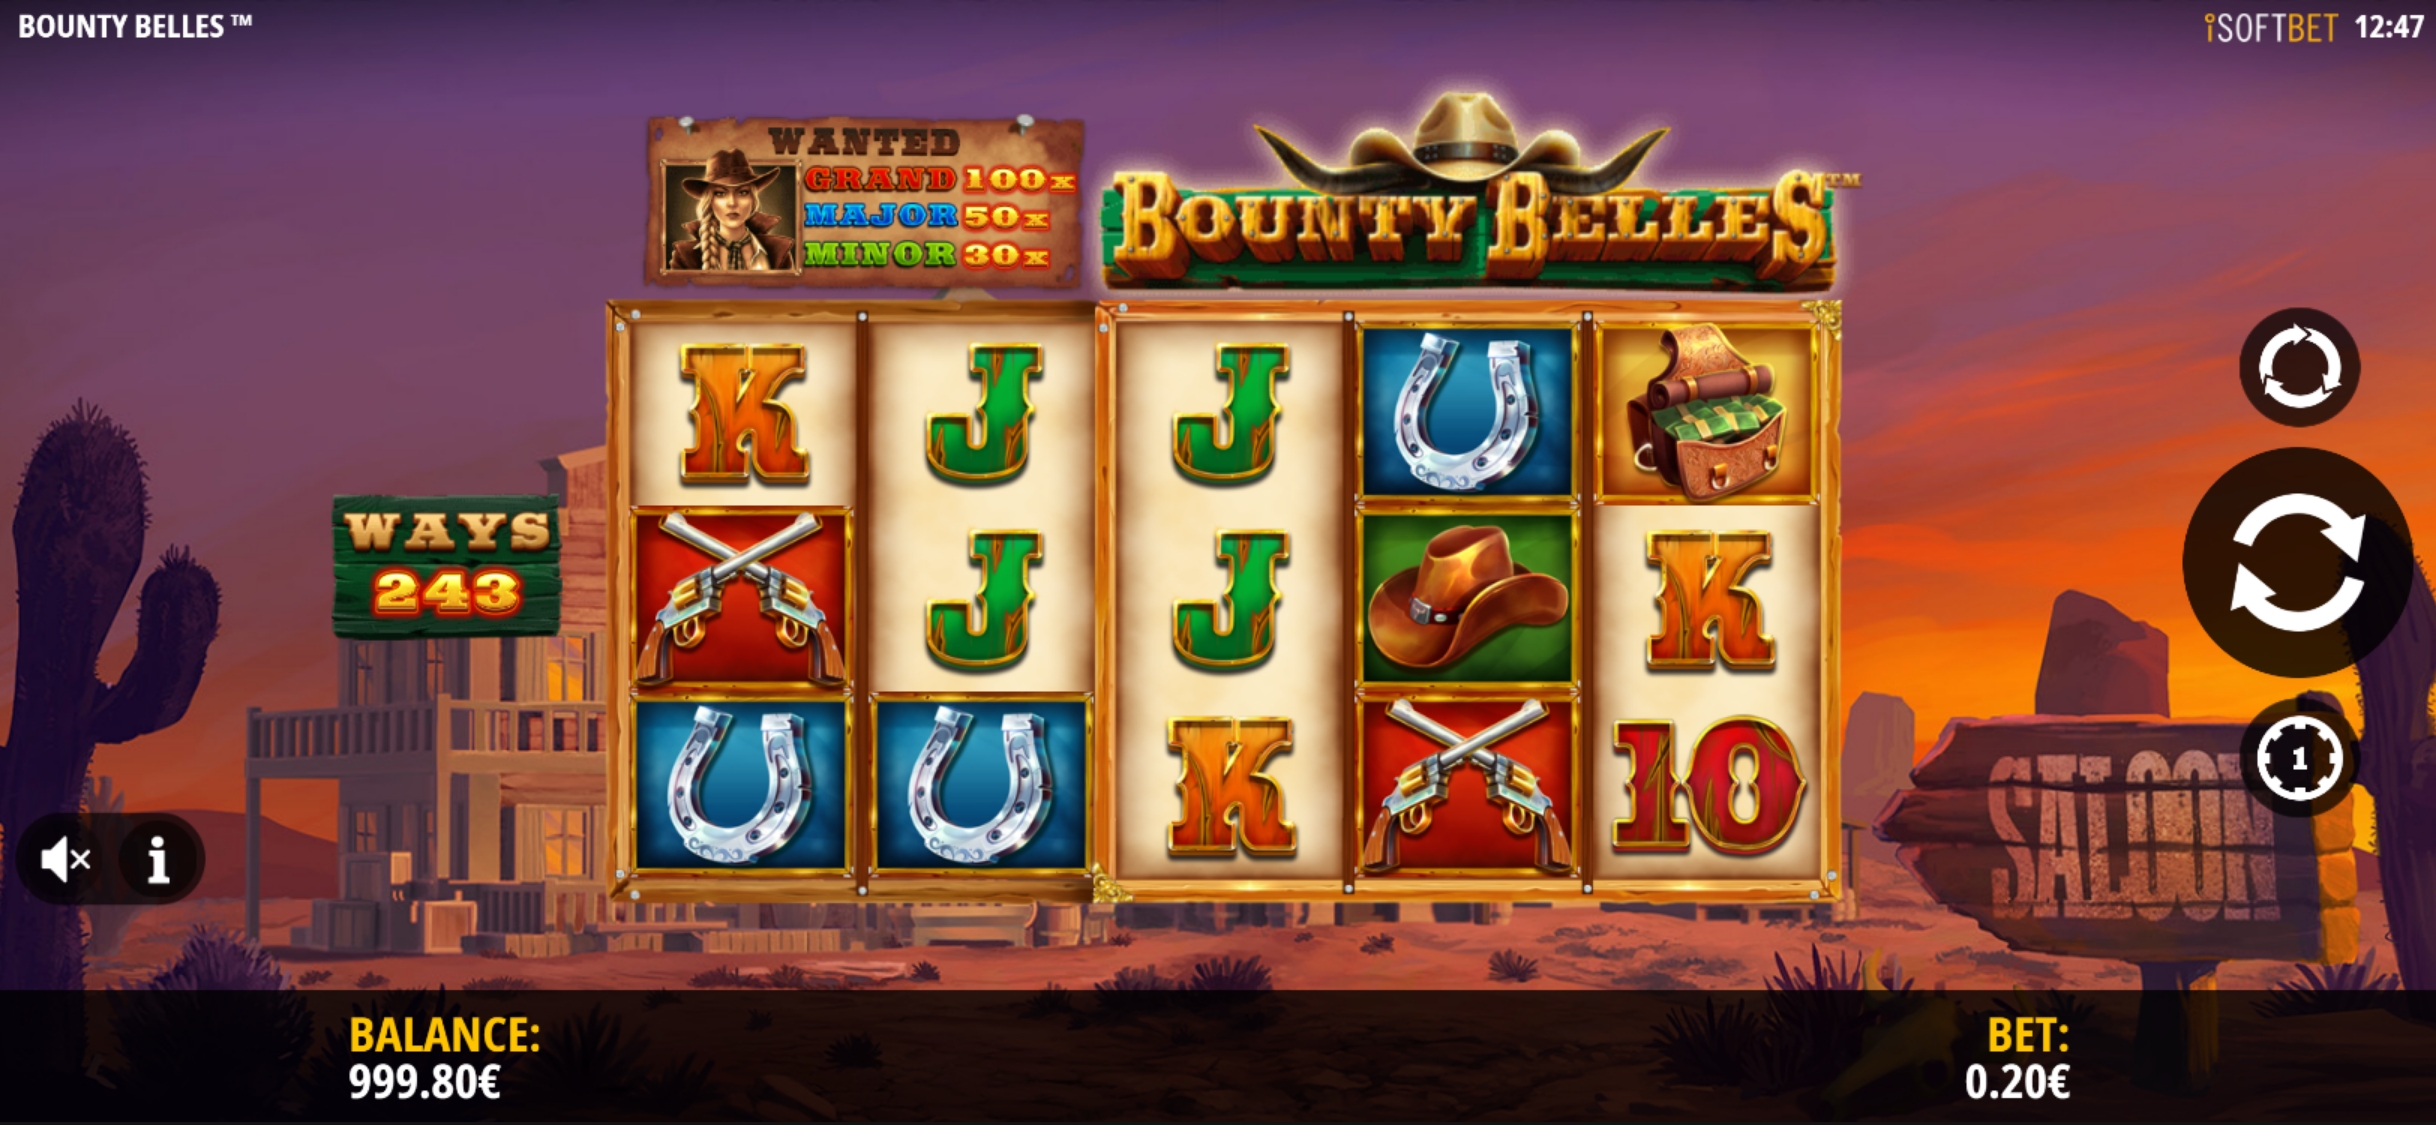 King Billy Casino Mobile Slot Games Review